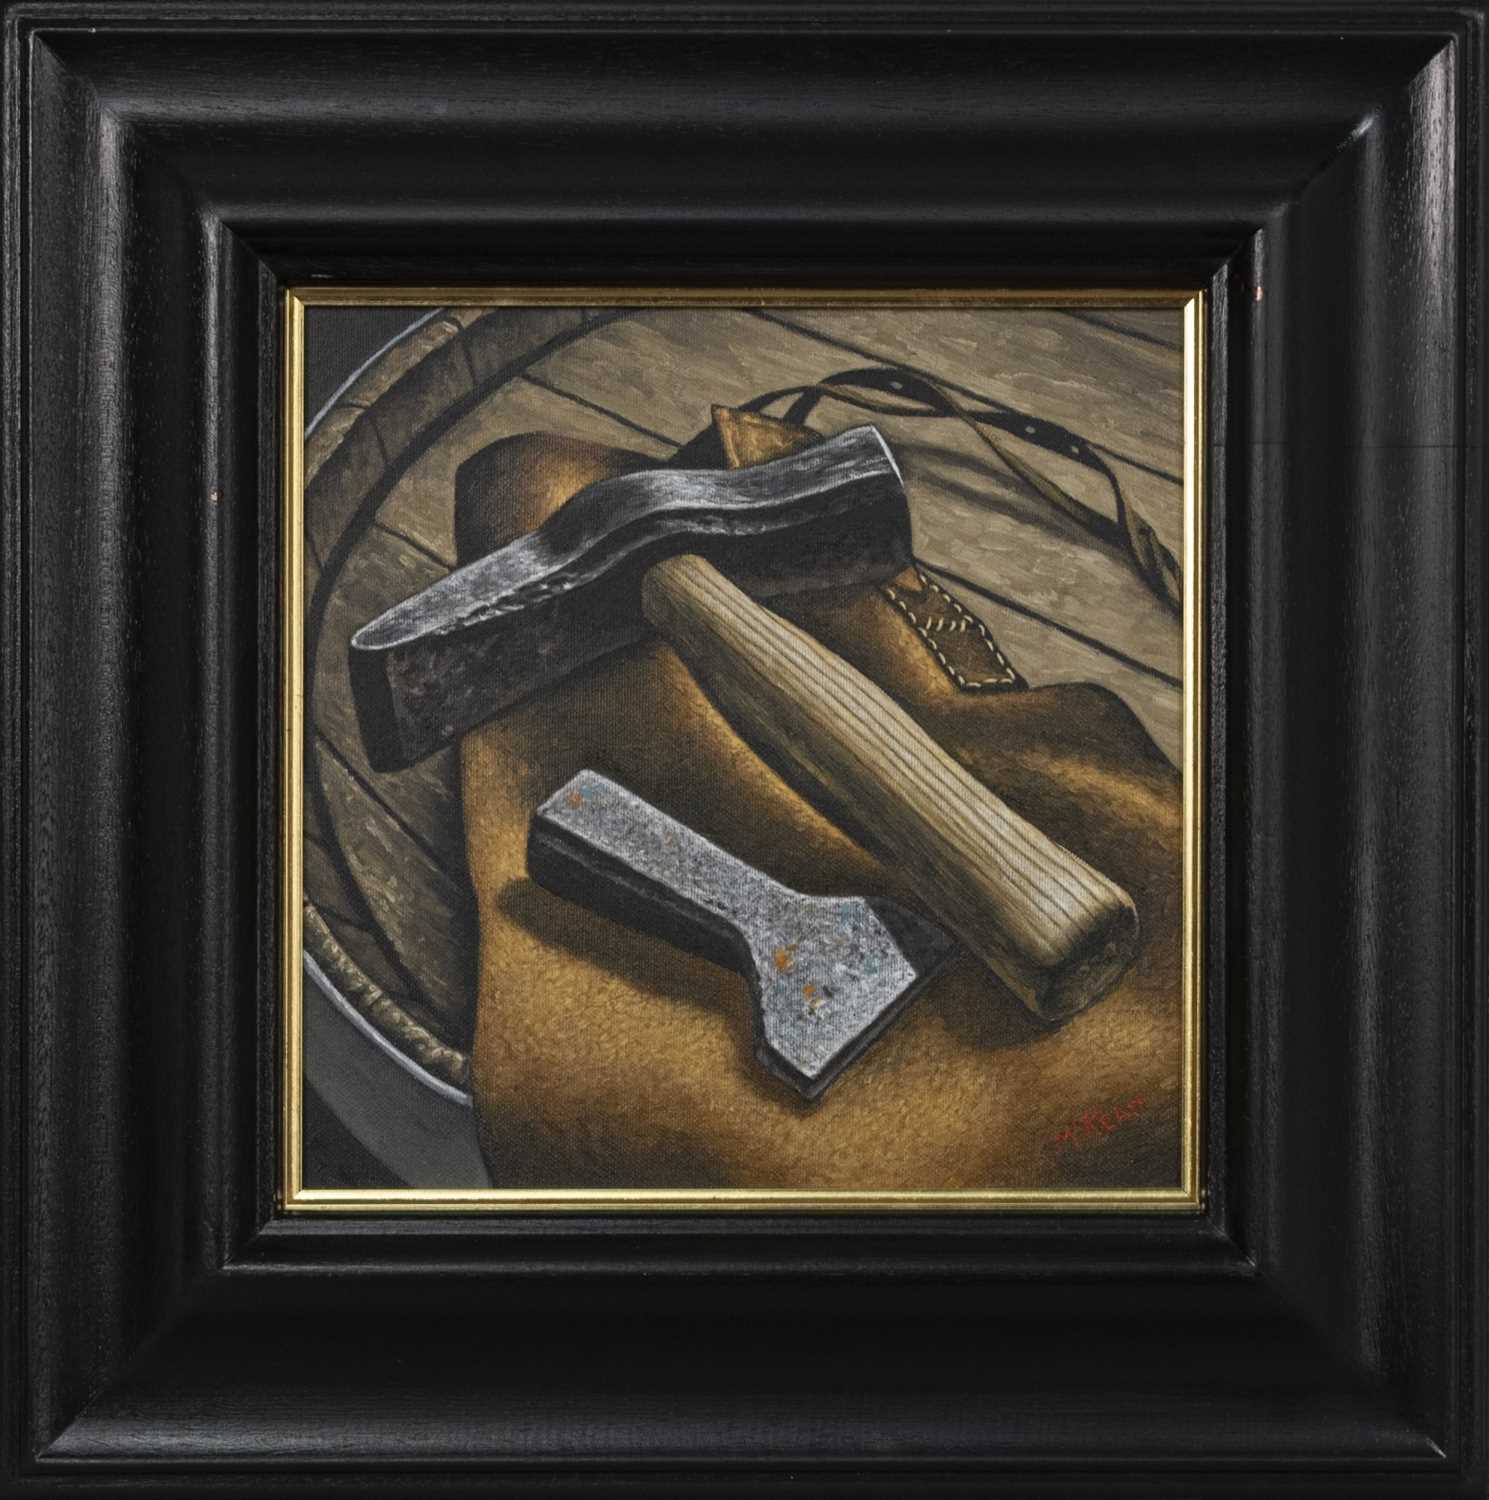 Lot 161 - COOPERS TOOLS, AN OIL BY GRAHAM MCKEAN